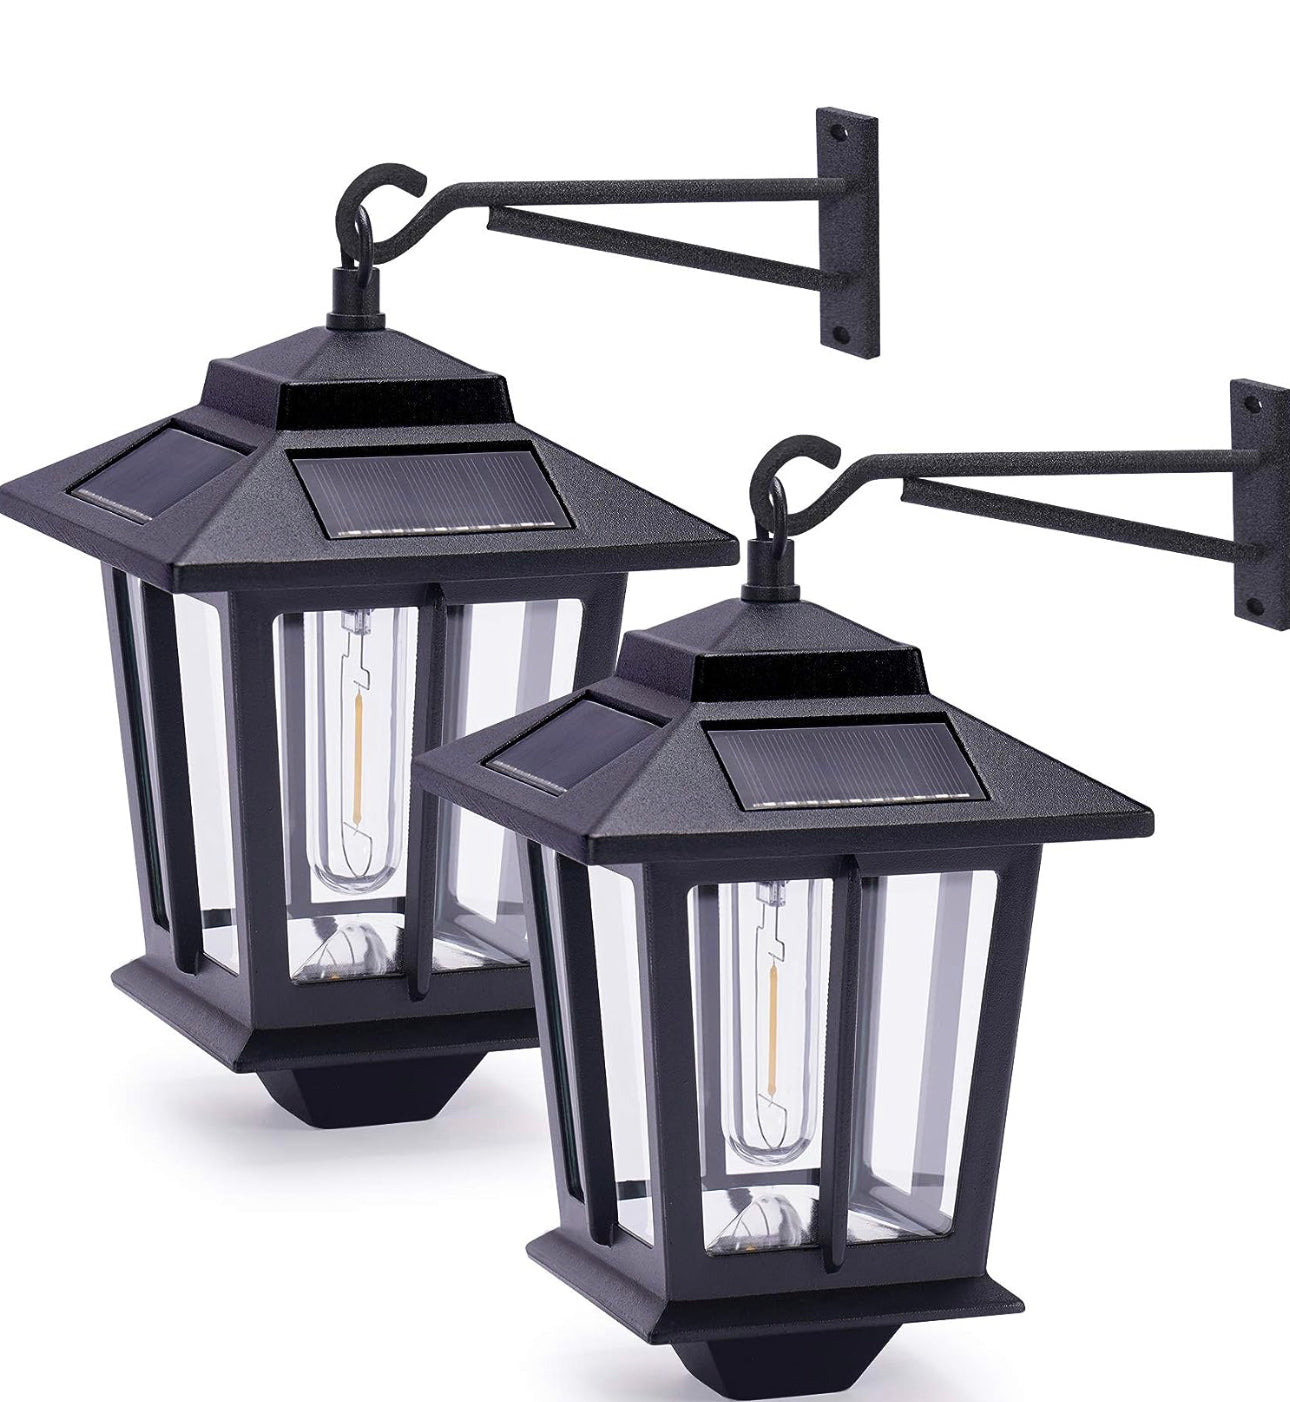 2 Pack SmartYard Solar Aluminum Wall Hanging Lanterns with Replaceable Bulb, 4 Solar Panels,Anti-Rust